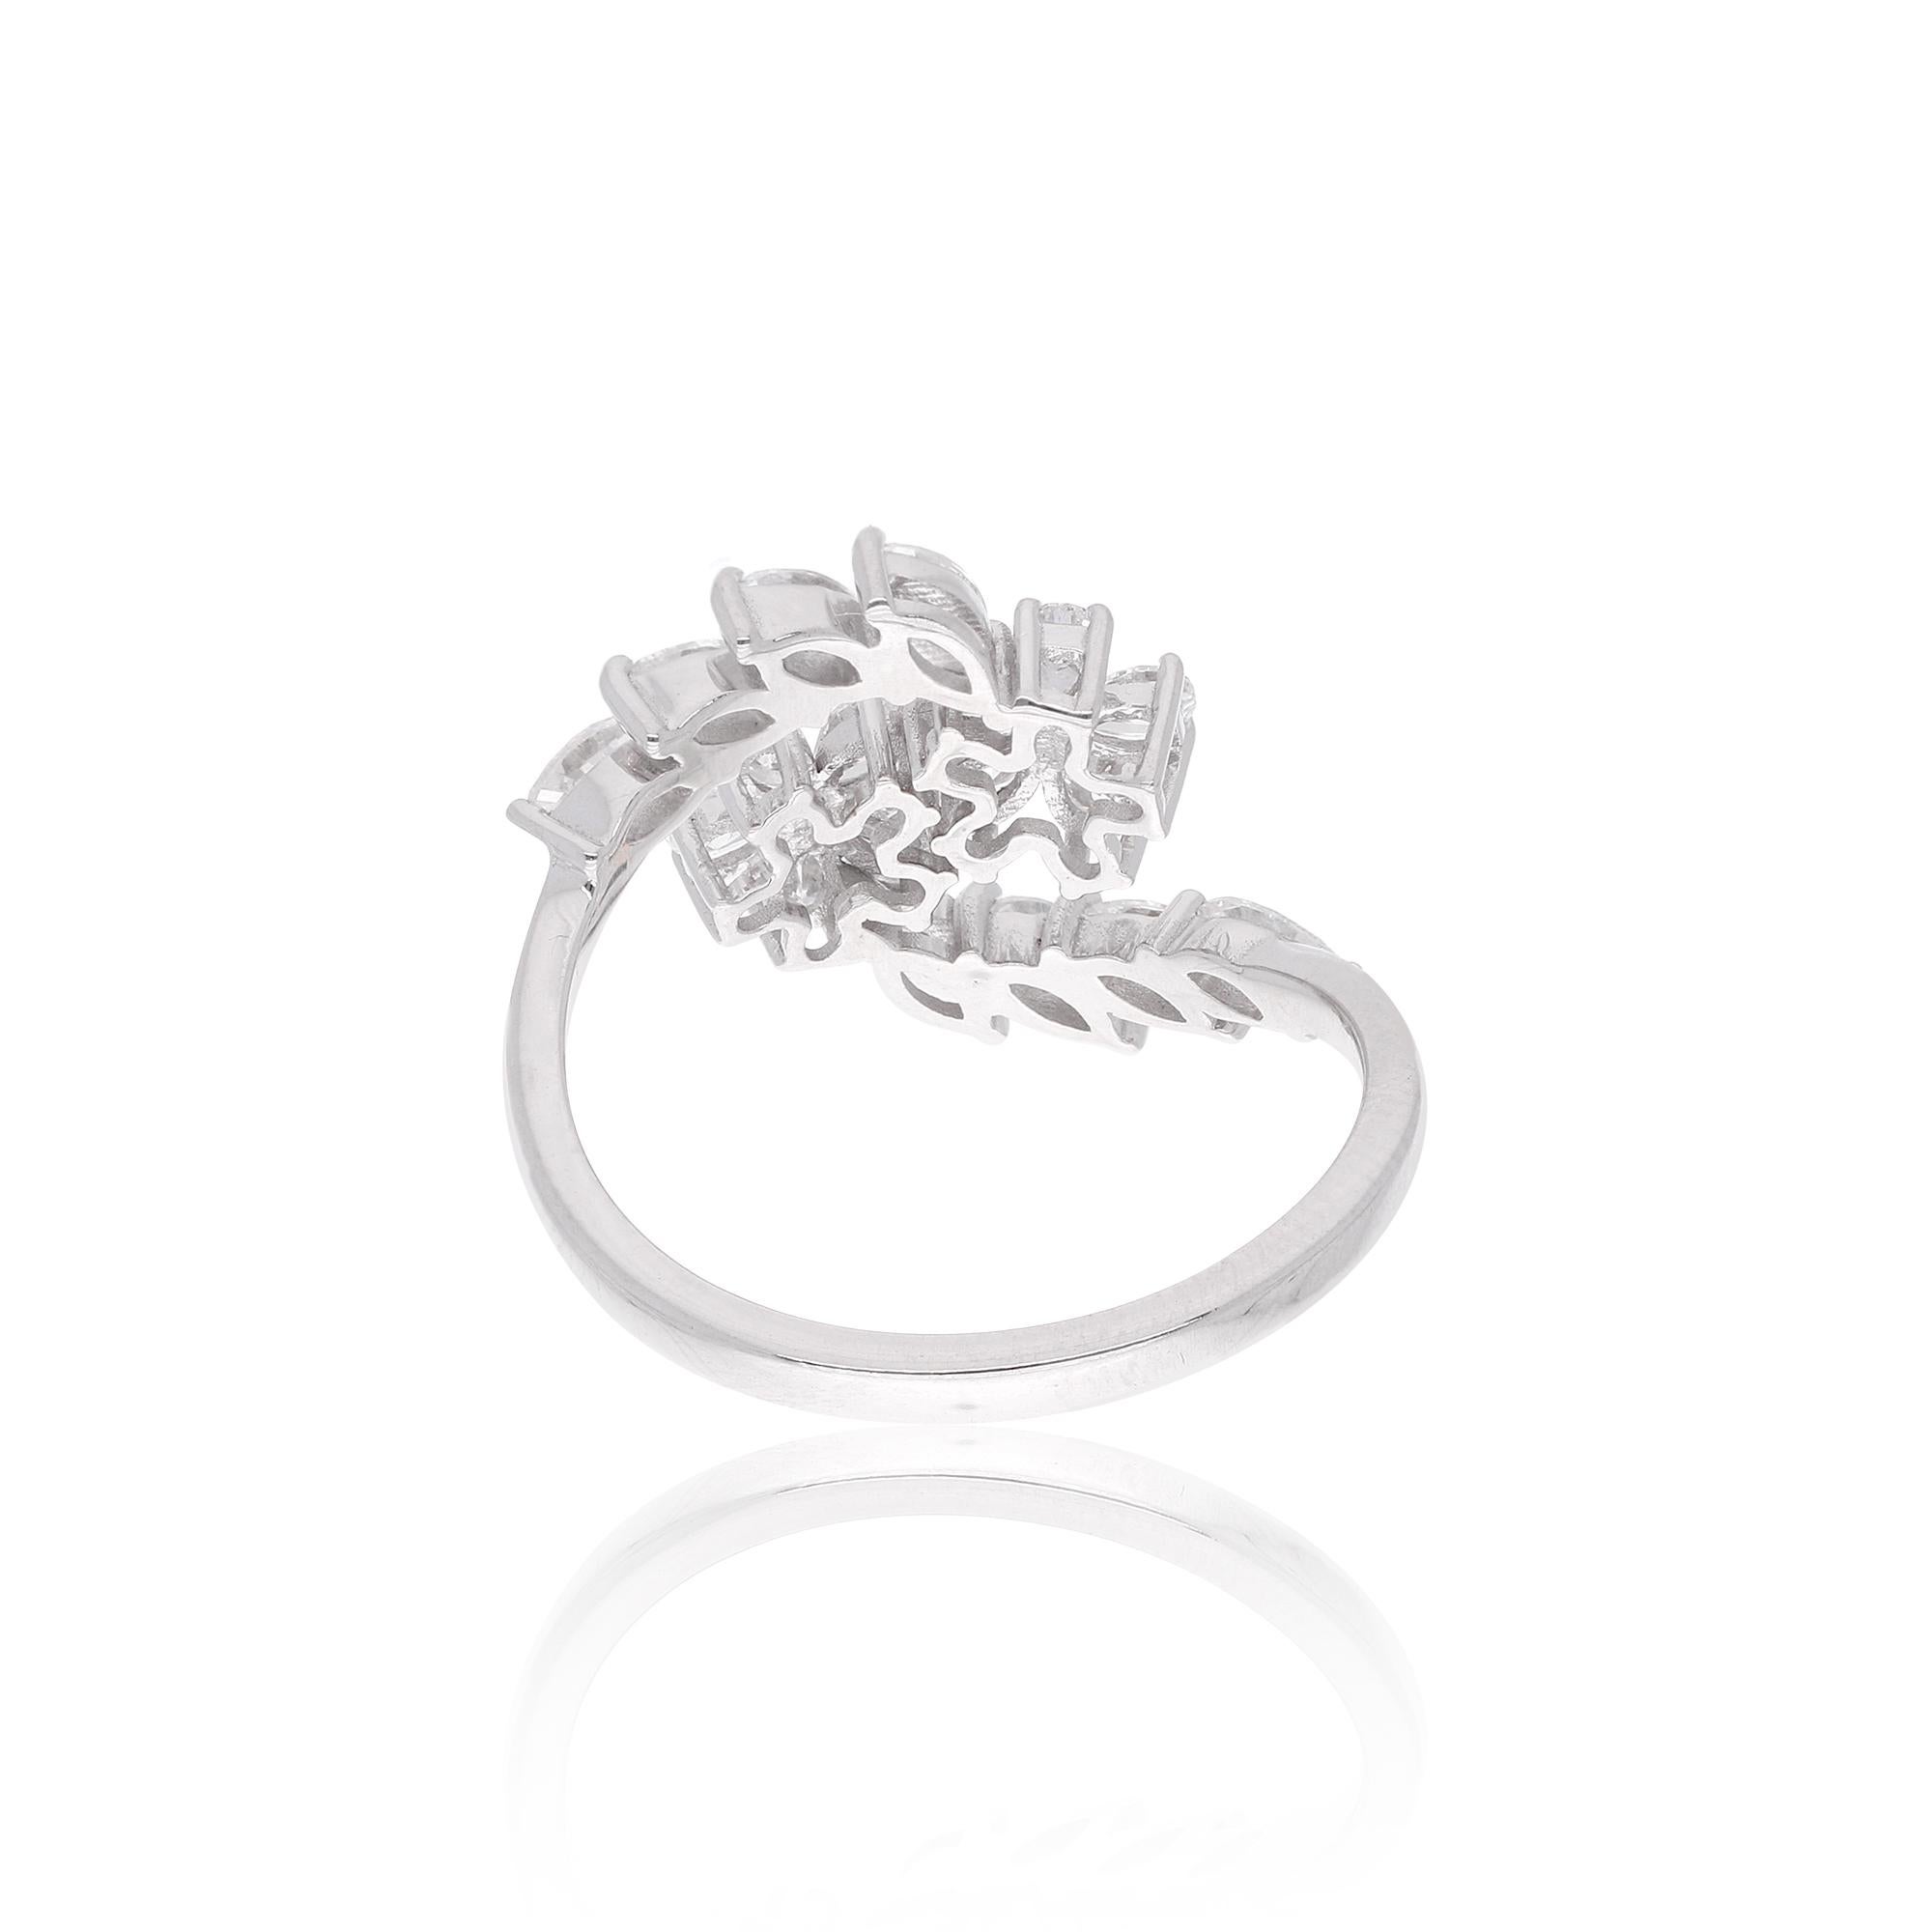 For Sale:  1 Carat Pear & Marquise Diamond Flower Ring 18 Karat White Gold Fine Jewelry 3